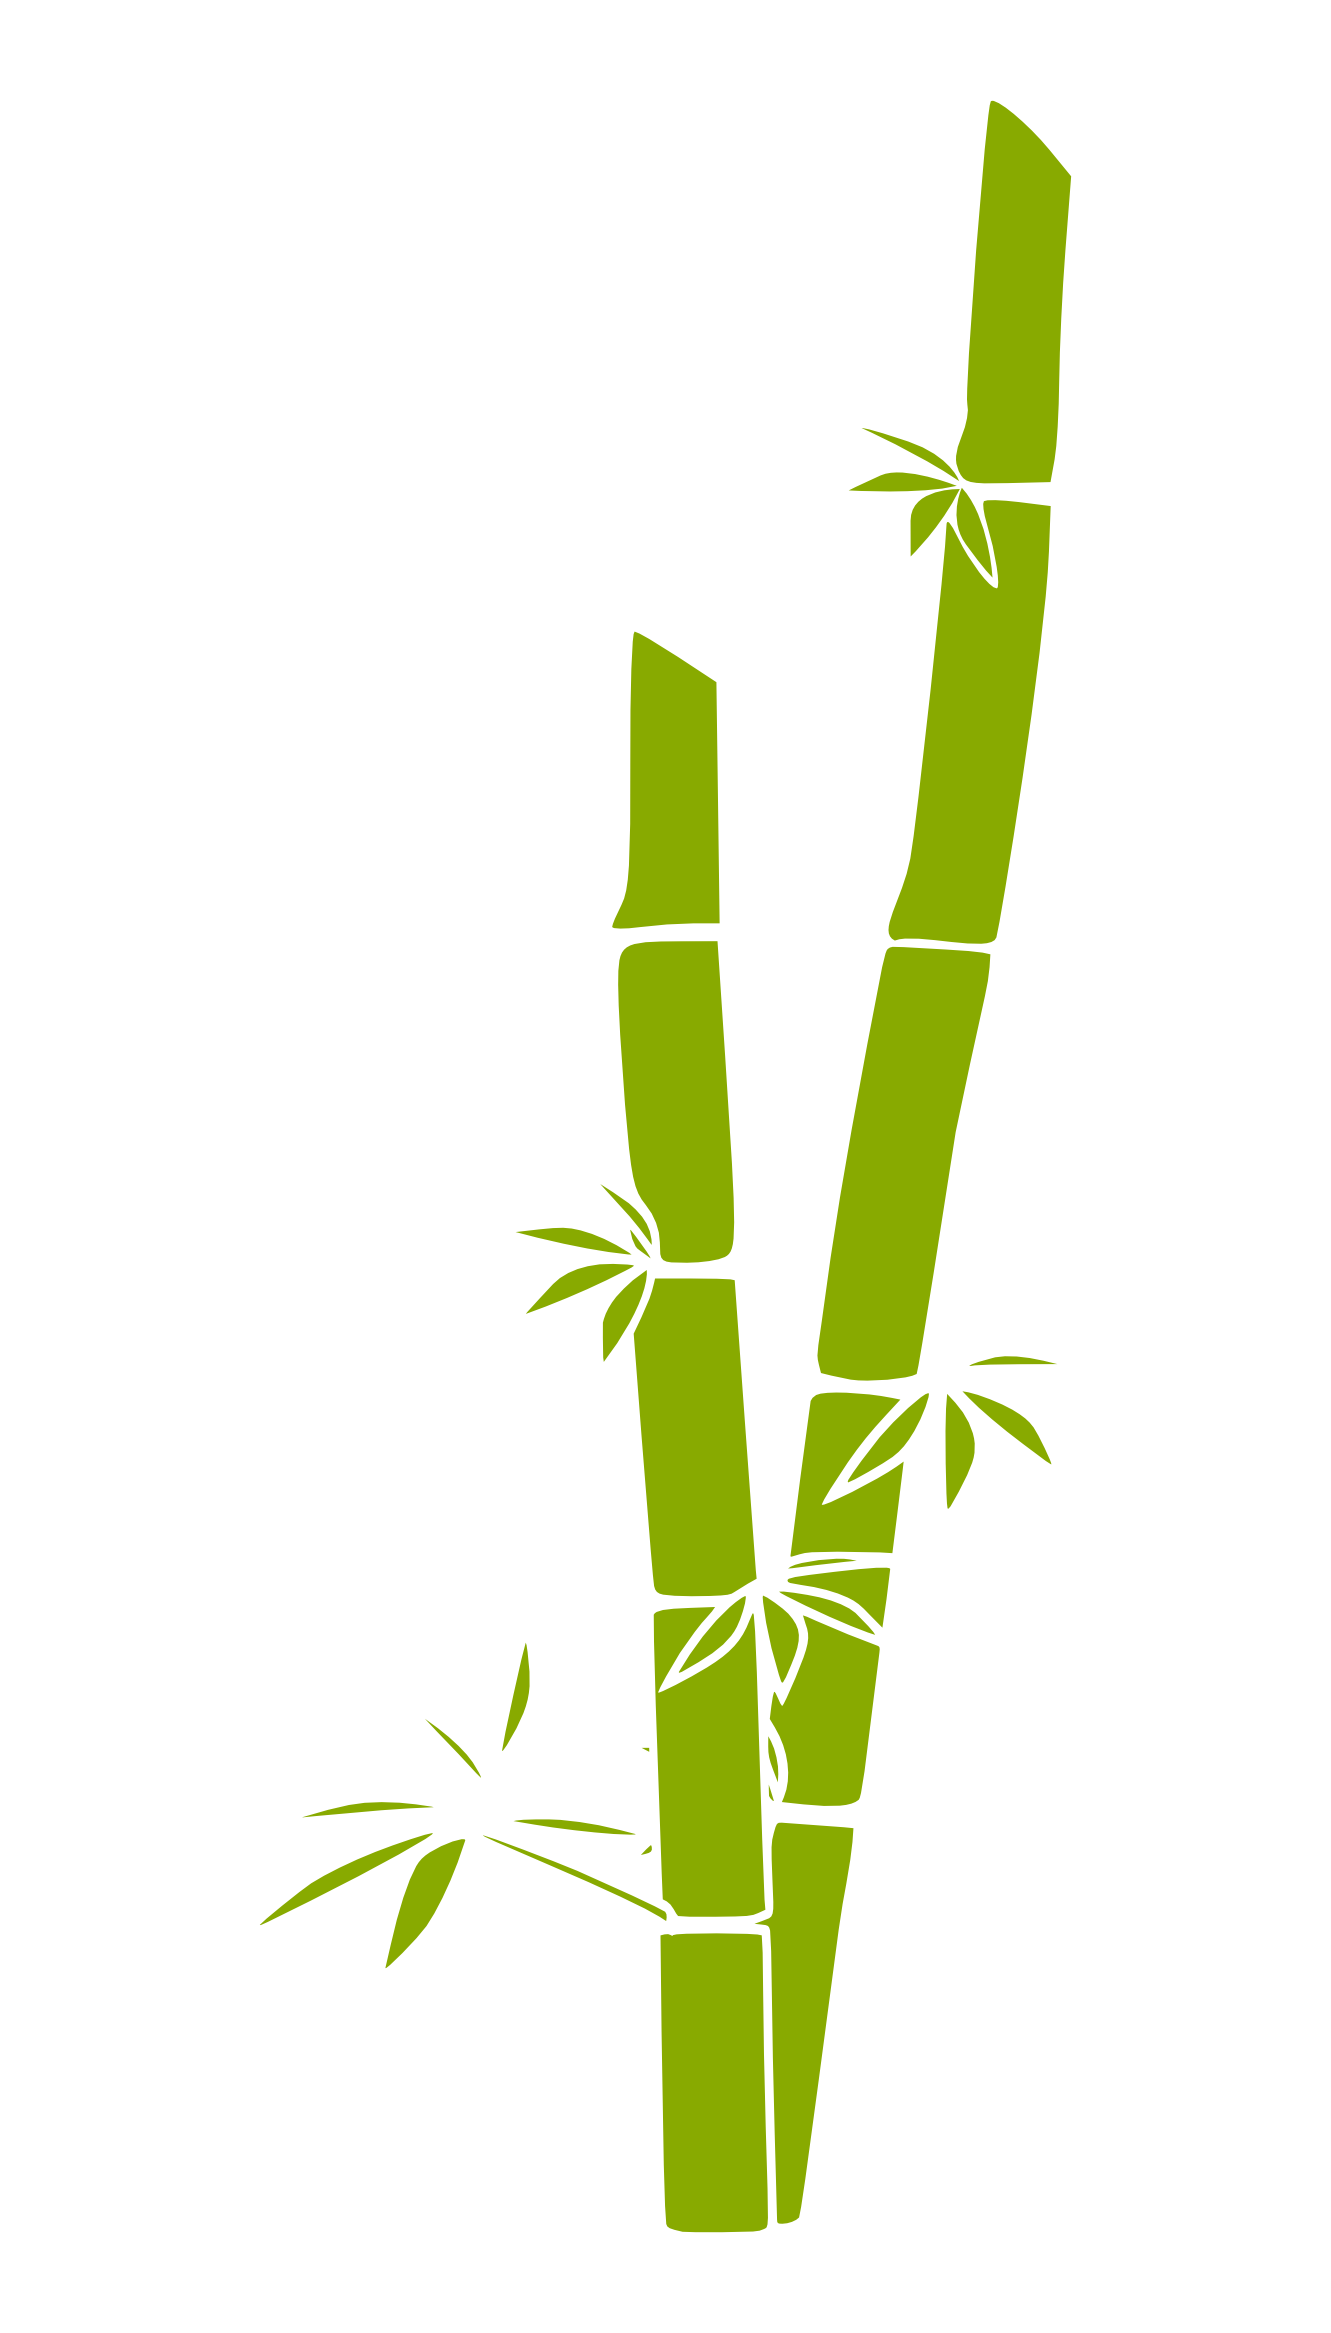 Bamboo Border Free Download   Clipart Best